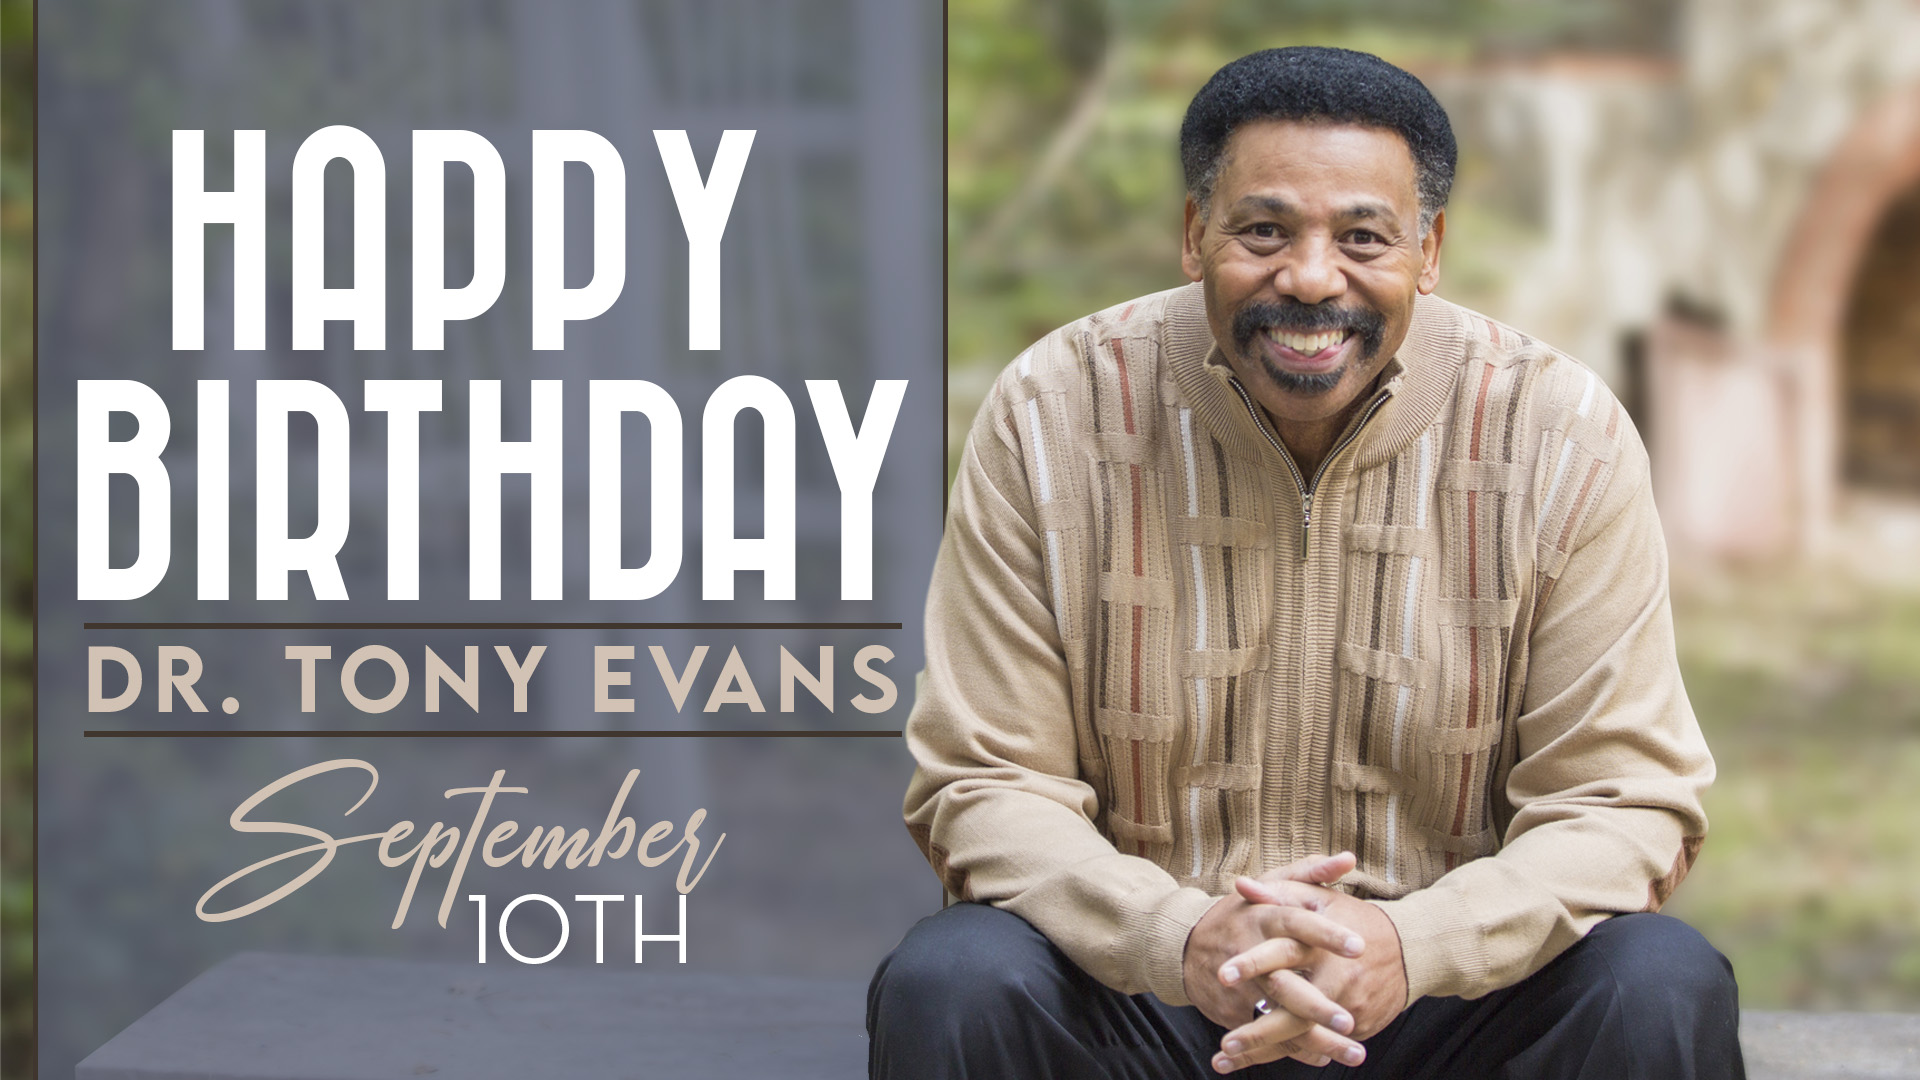 Dr. Tony Evans seated in a beige sweater with happy birthday wishes in text next to him